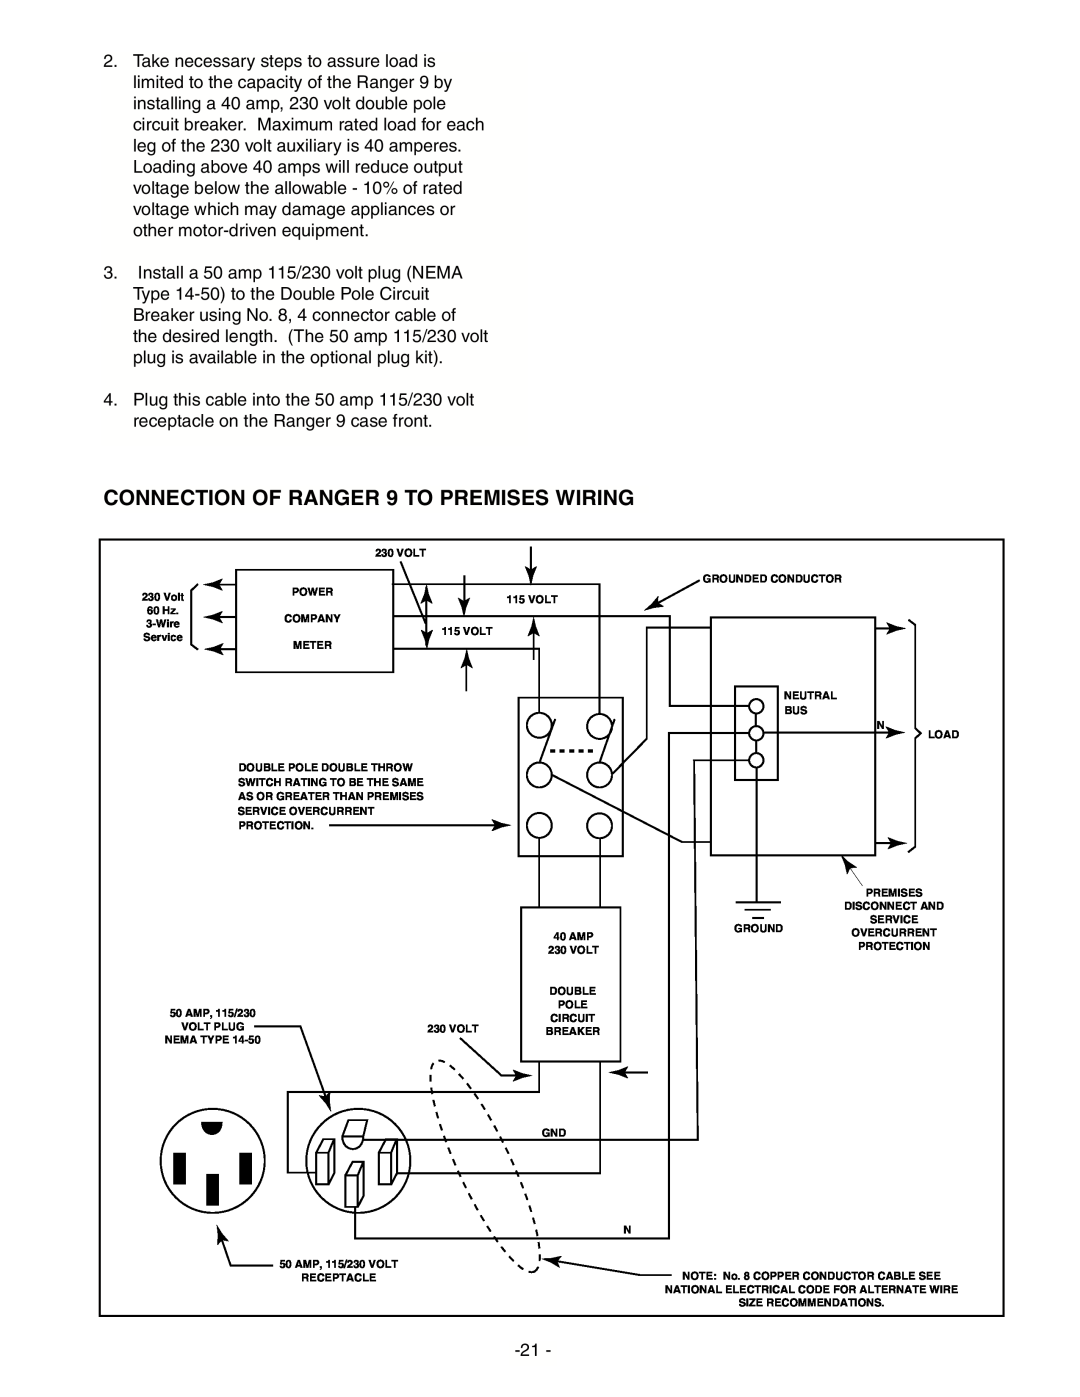 Lincoln Electric IM511-D manual CONNECTION OF RANGER 9 TO PREMISES WIRING 